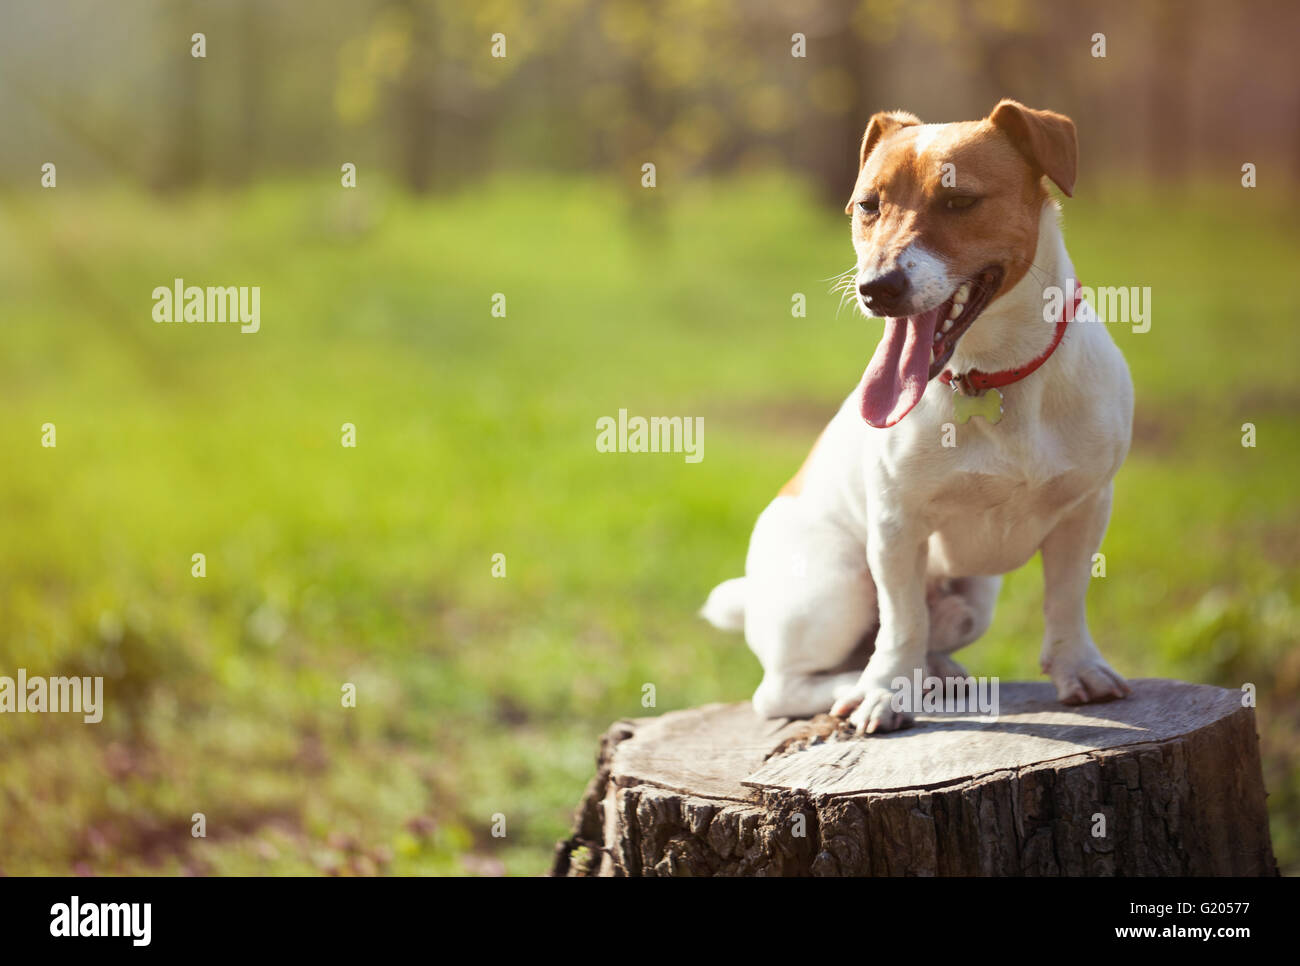 Little Jack Russell puppy in green park. Cute small domestic dog, good friend for a family and kids. Friendly and playful canine breed Stock Photo